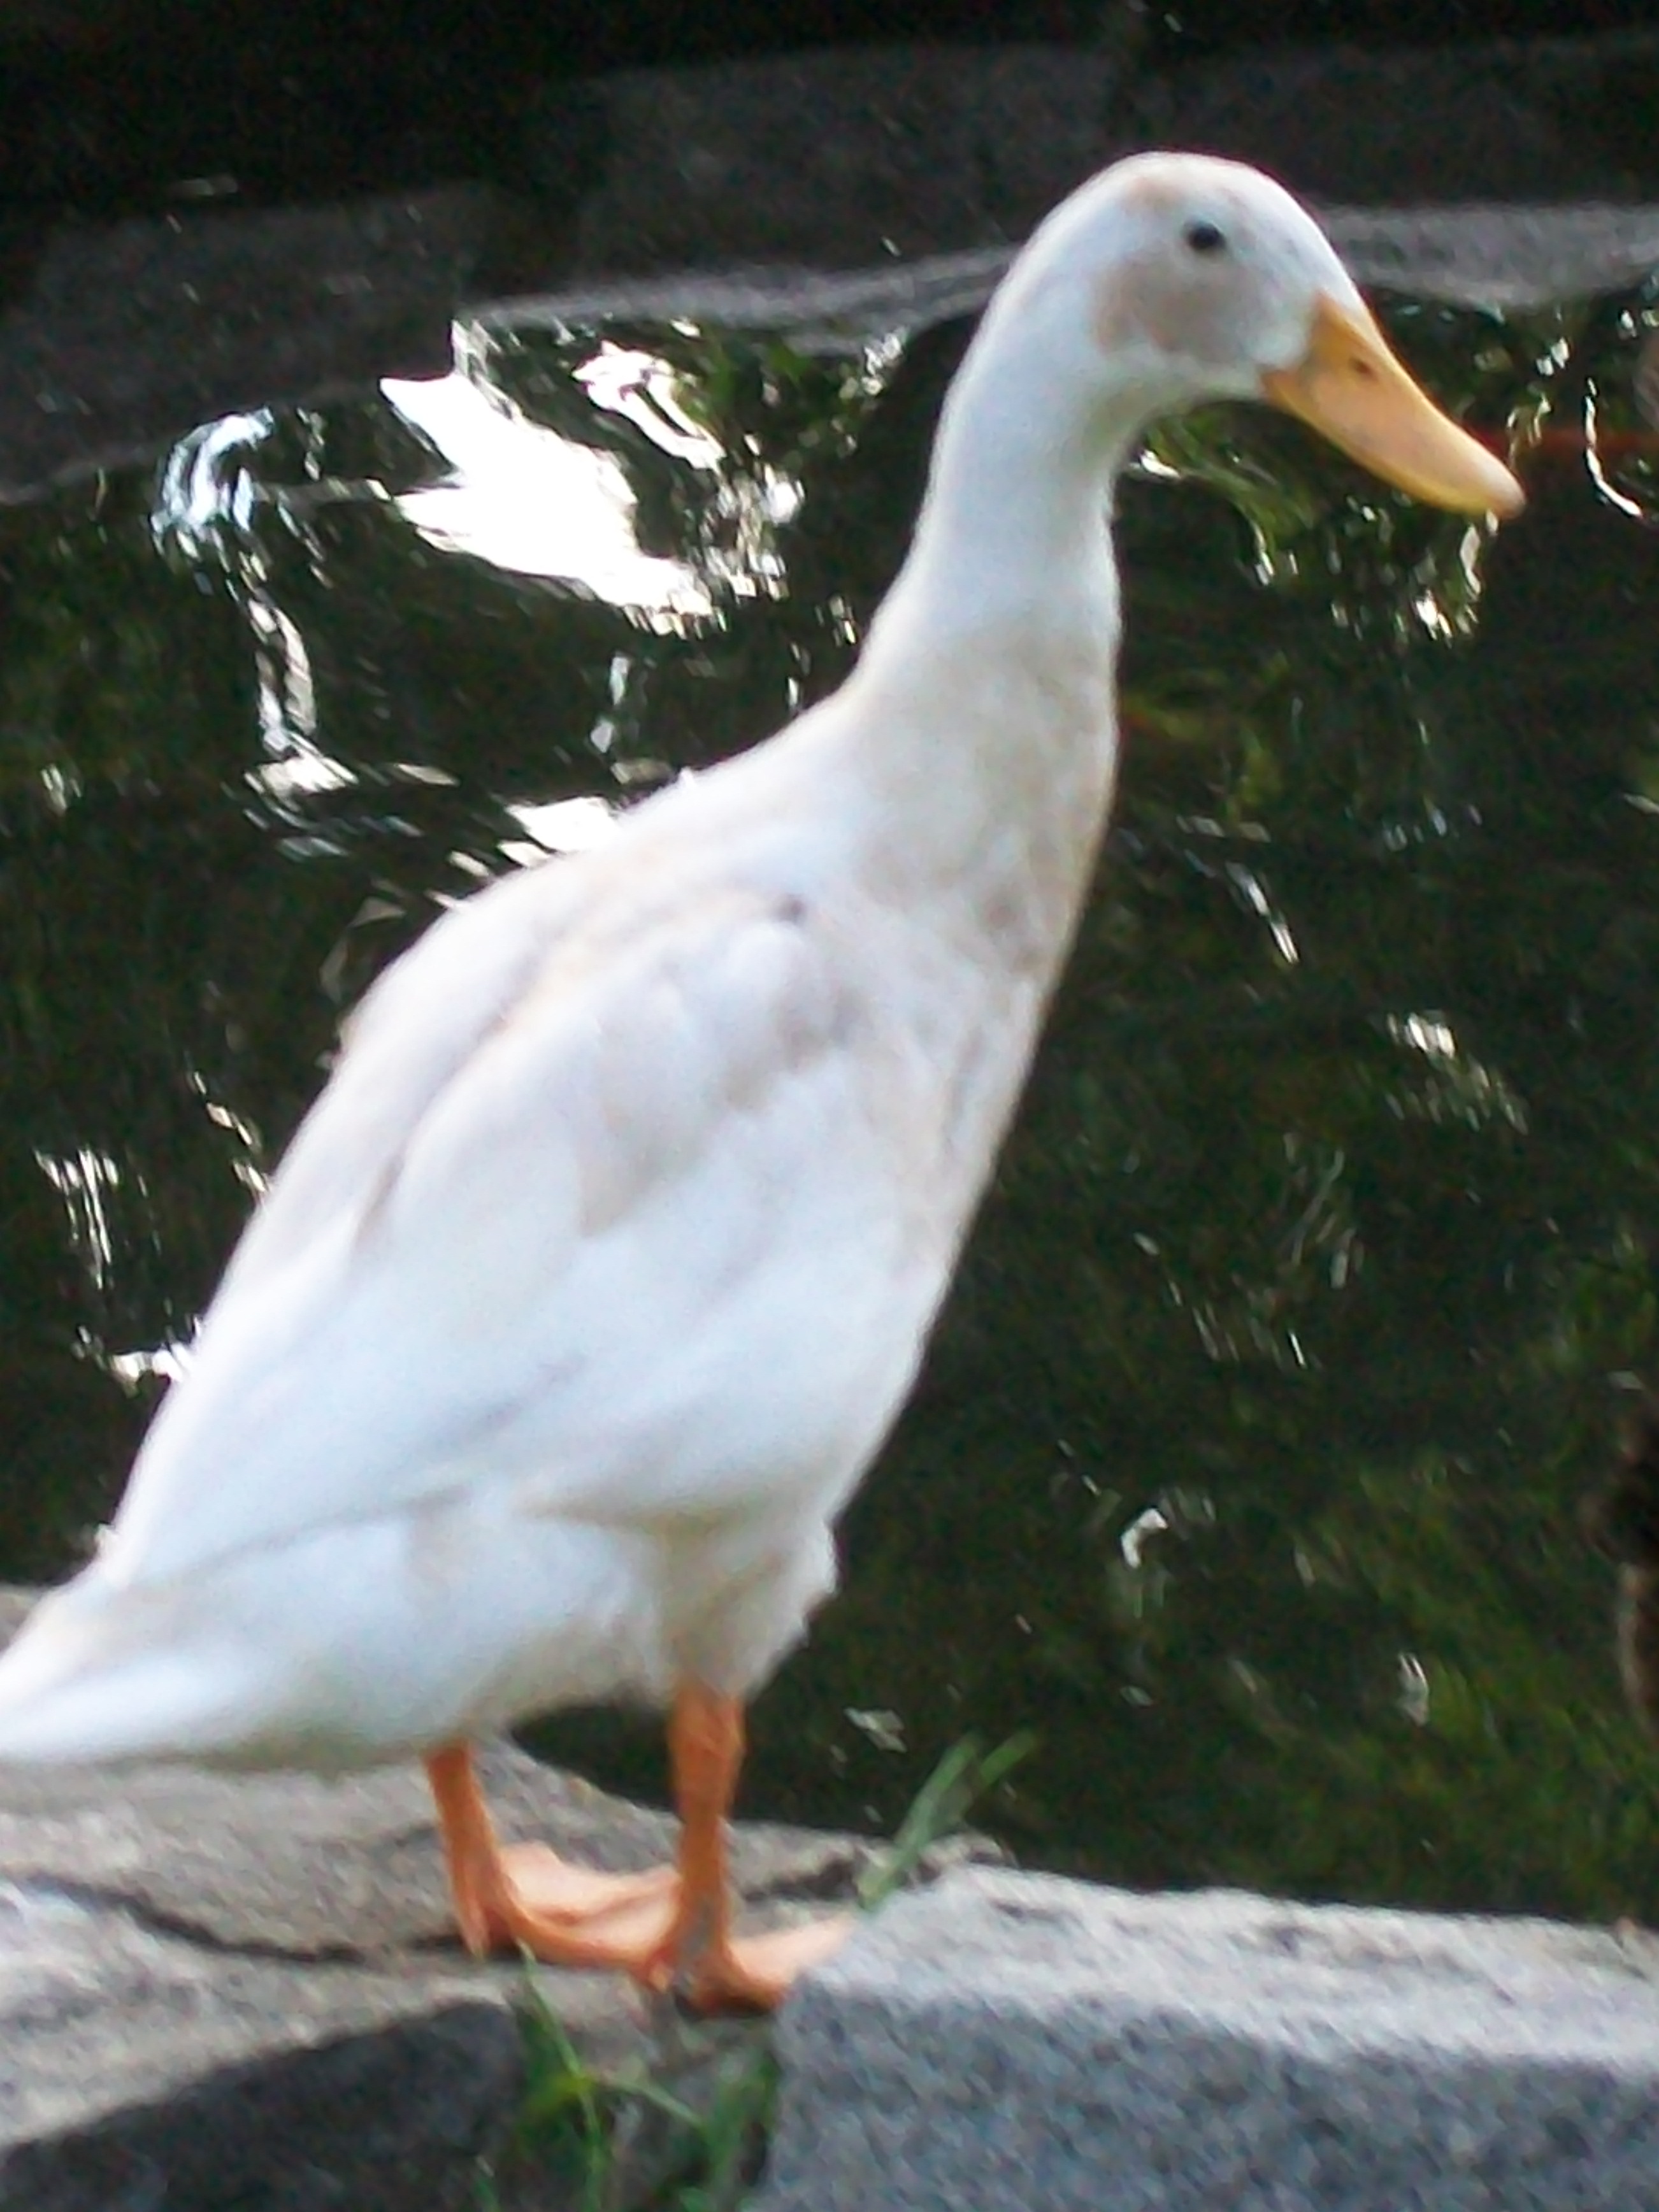 The White Duck | Waggingmytale's Blog